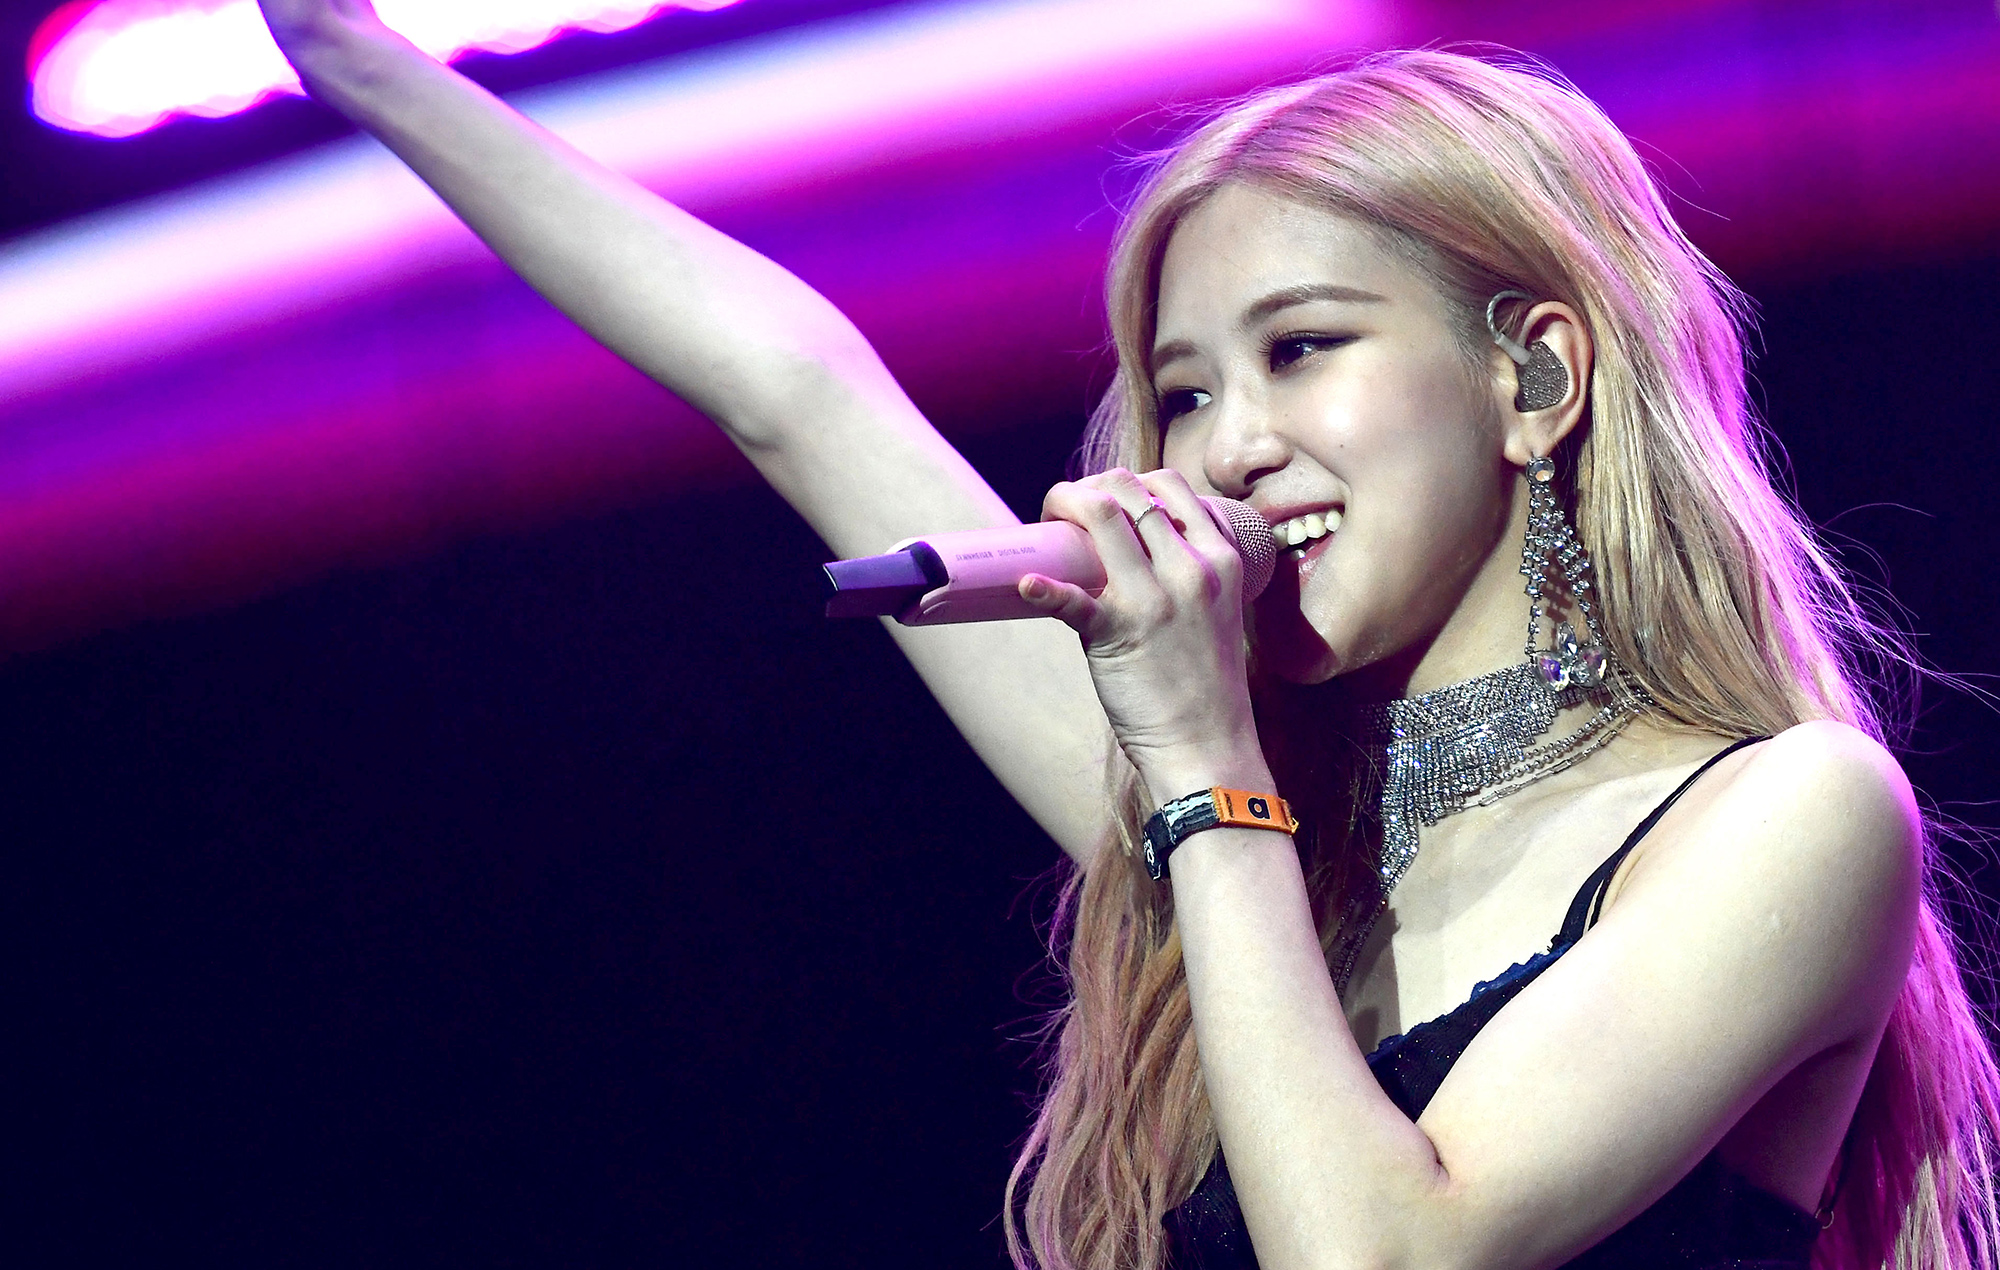 BLACKPINK's Rosé To Promote Her New Solo Album On 'The Tonight Show Starring Jimmy Fallon'